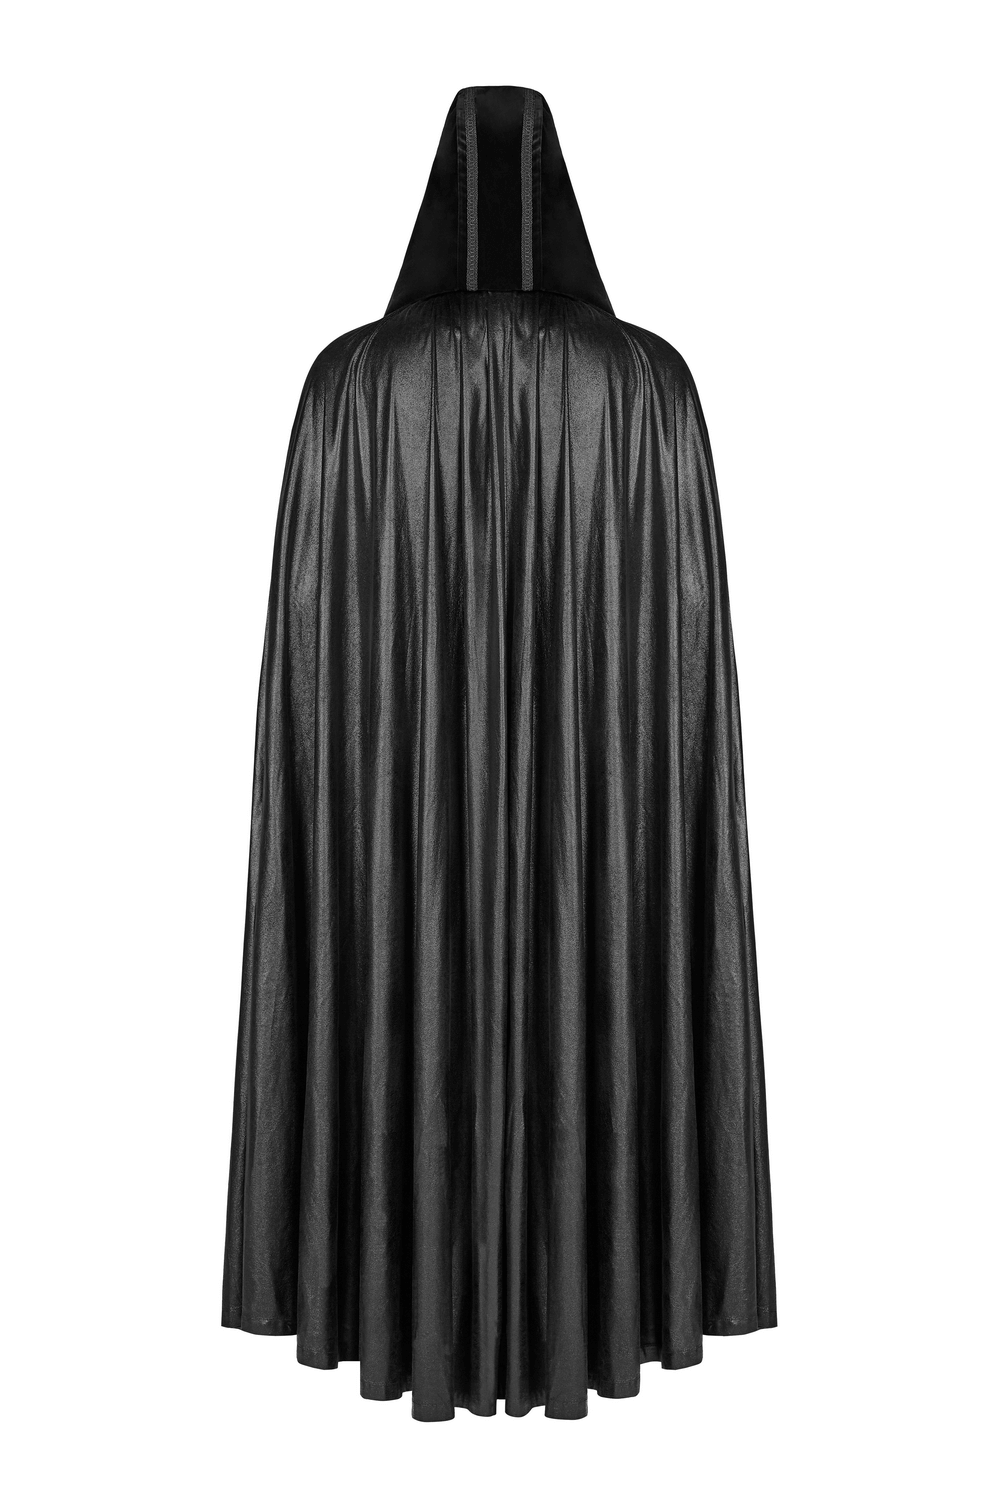 Hooded Longline Black Cloak for Themed Events and Cosplay - HARD'N'HEAVY